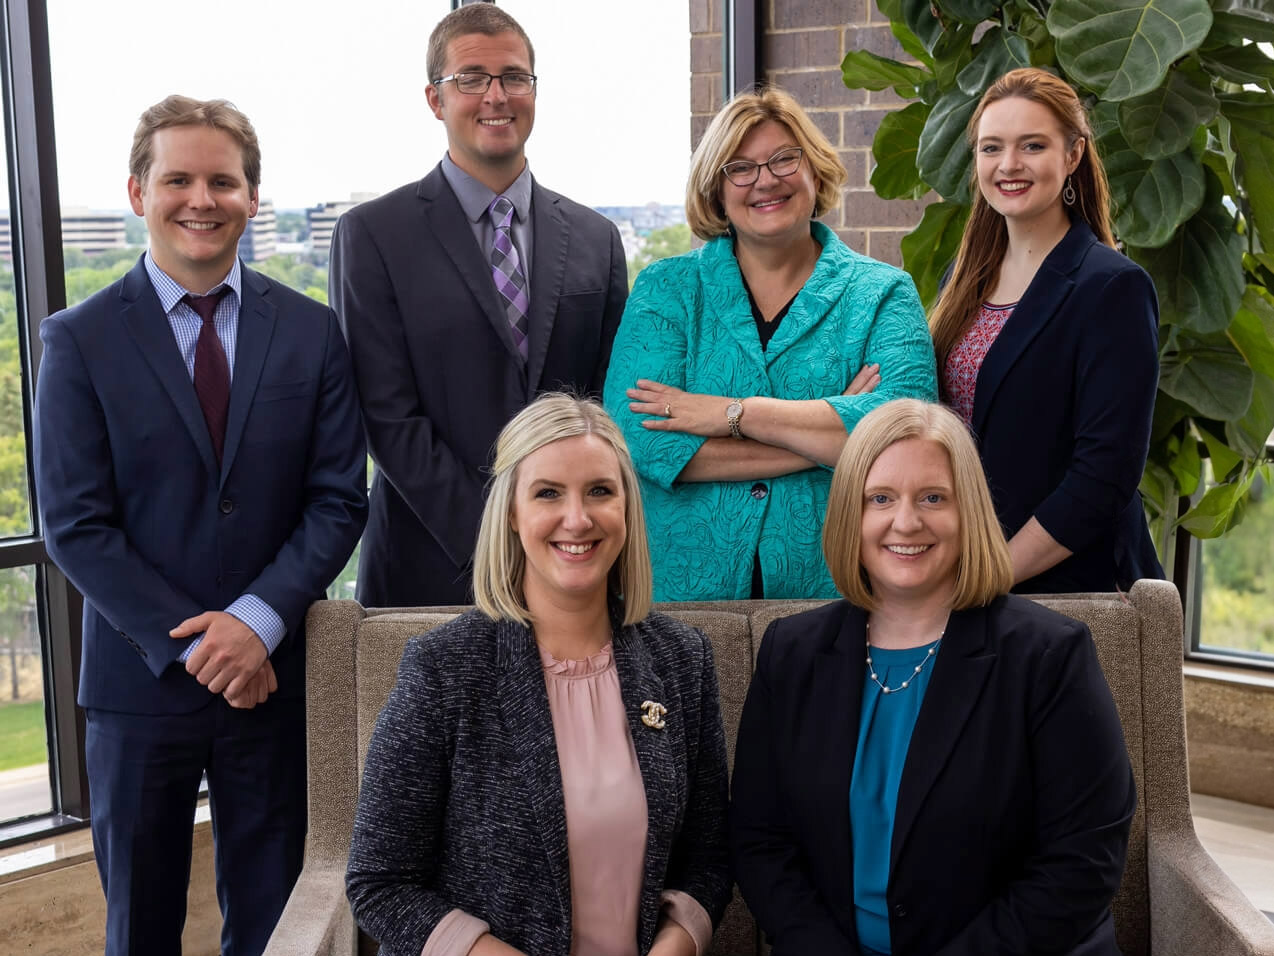 Laurel Wealth Planning team of financial advisors and client service staff